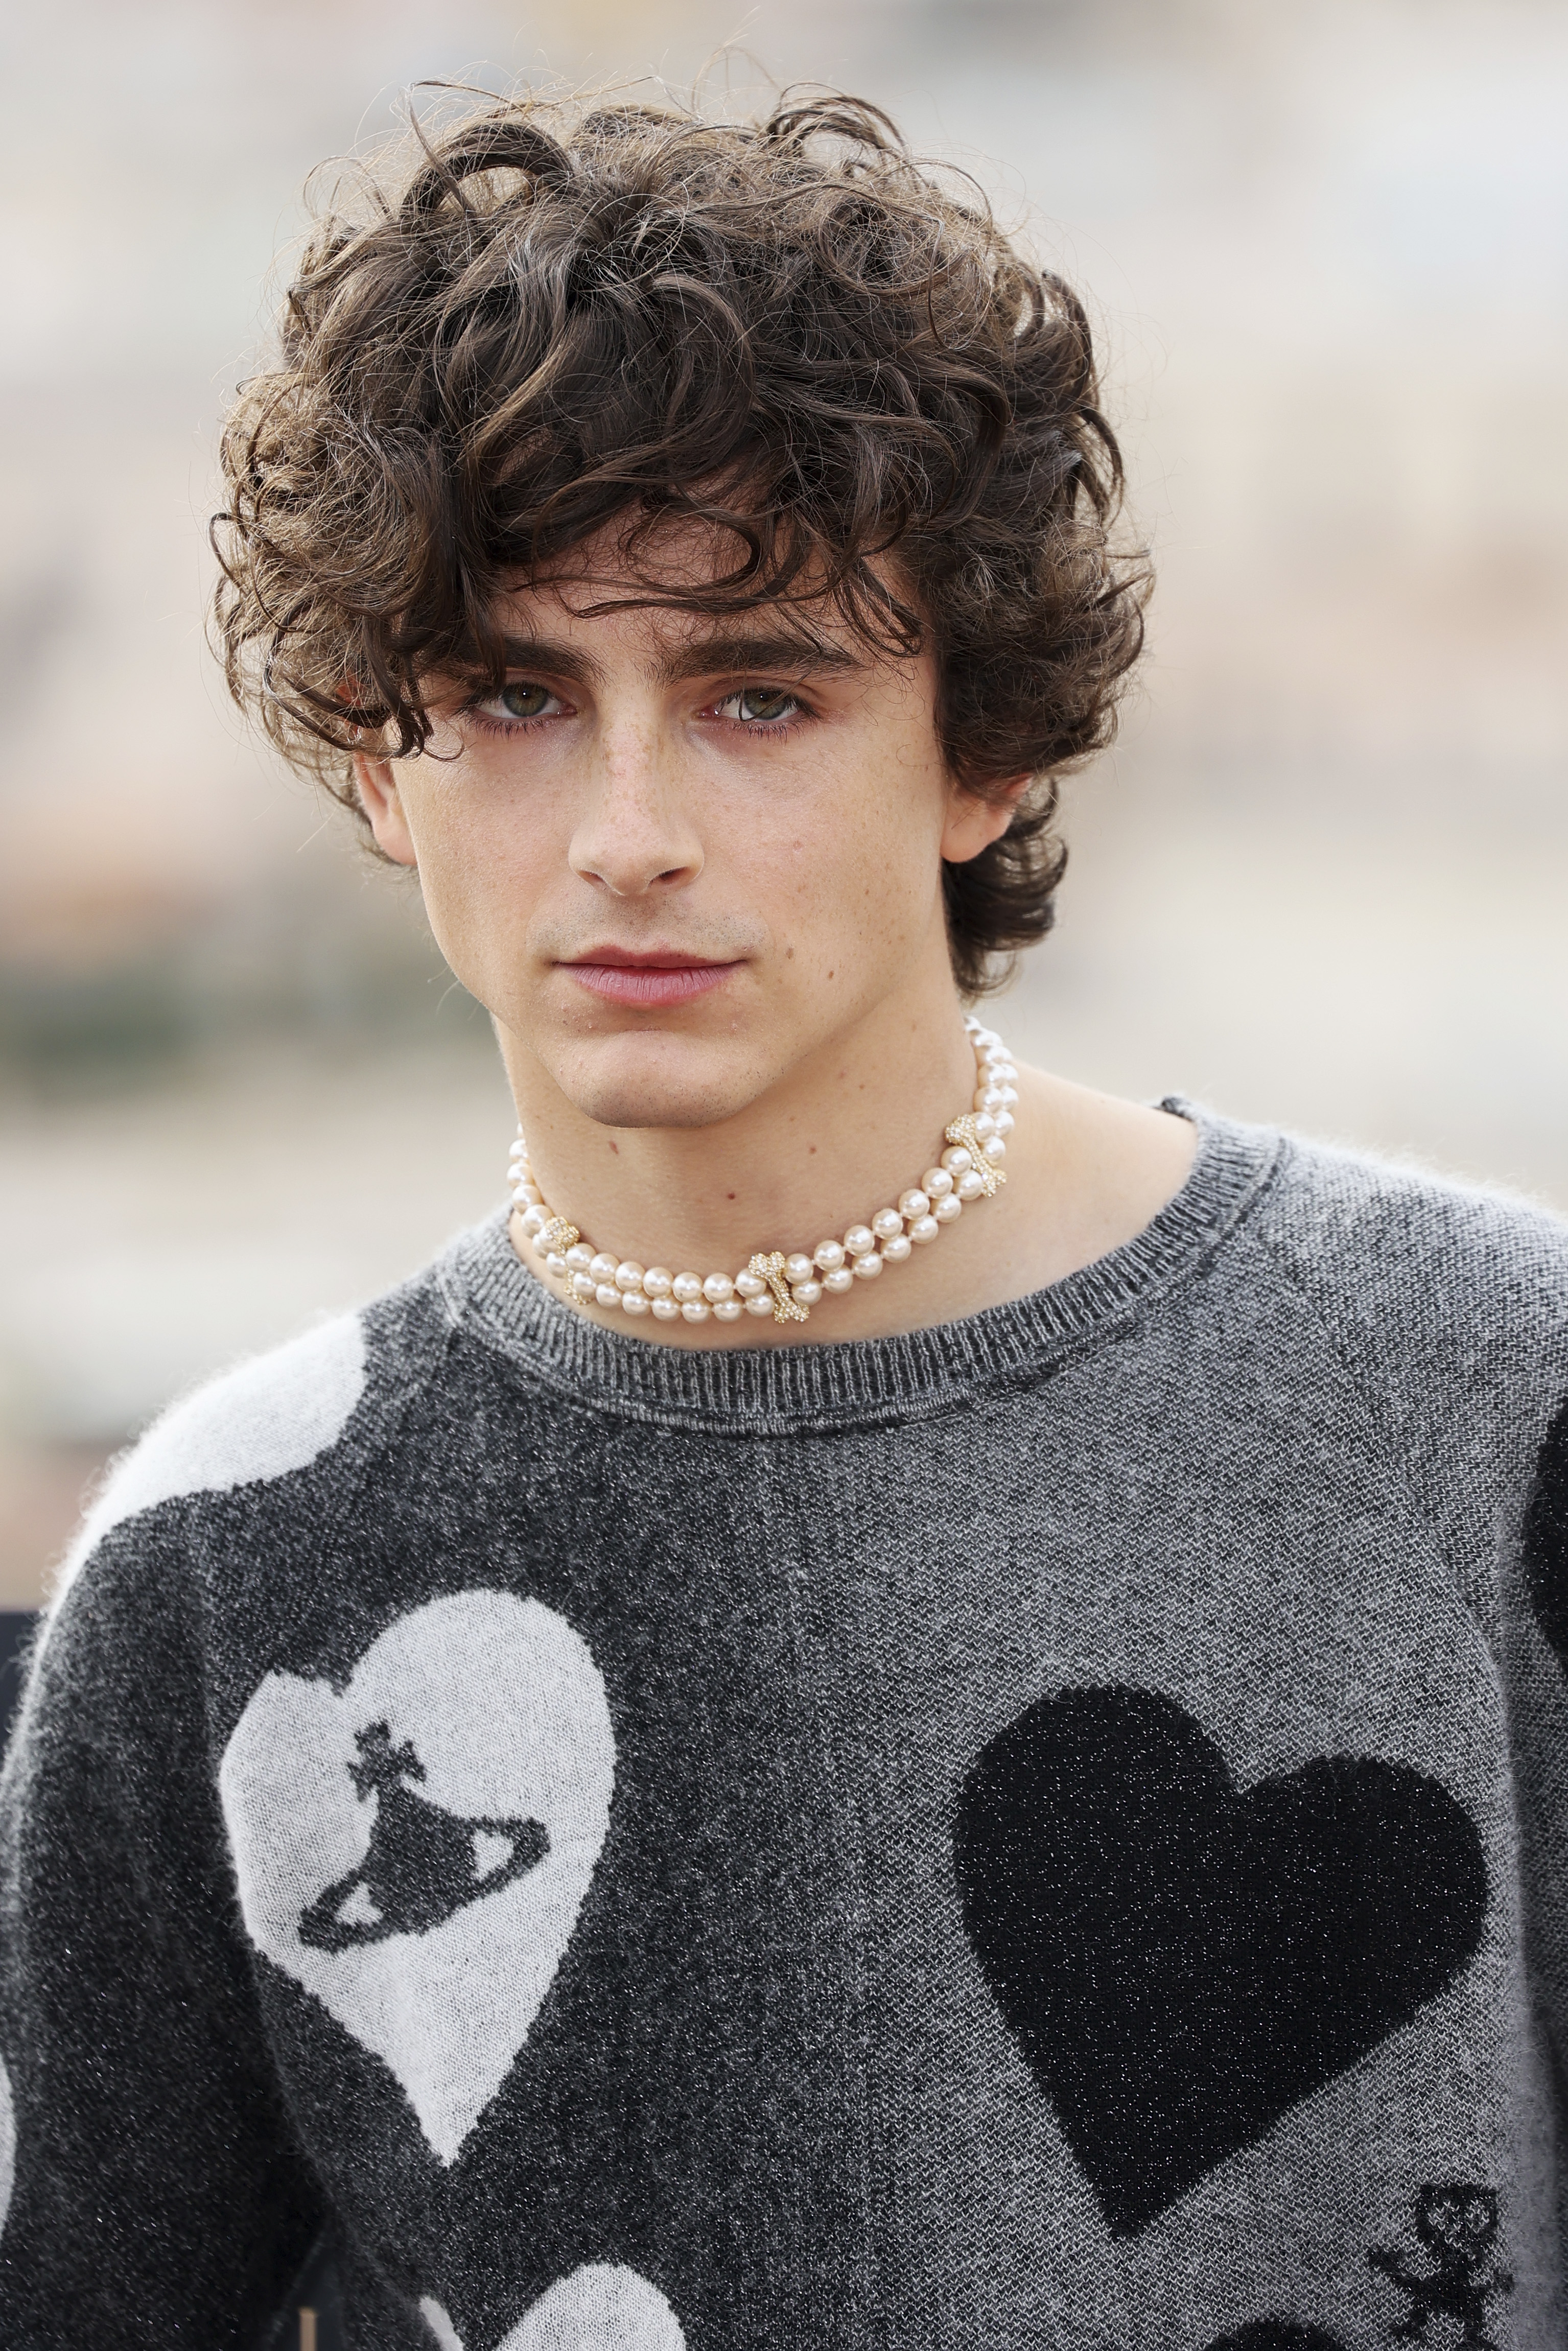 A close-up of Timothée in a heart-themed crewneck sweater and pearl choker